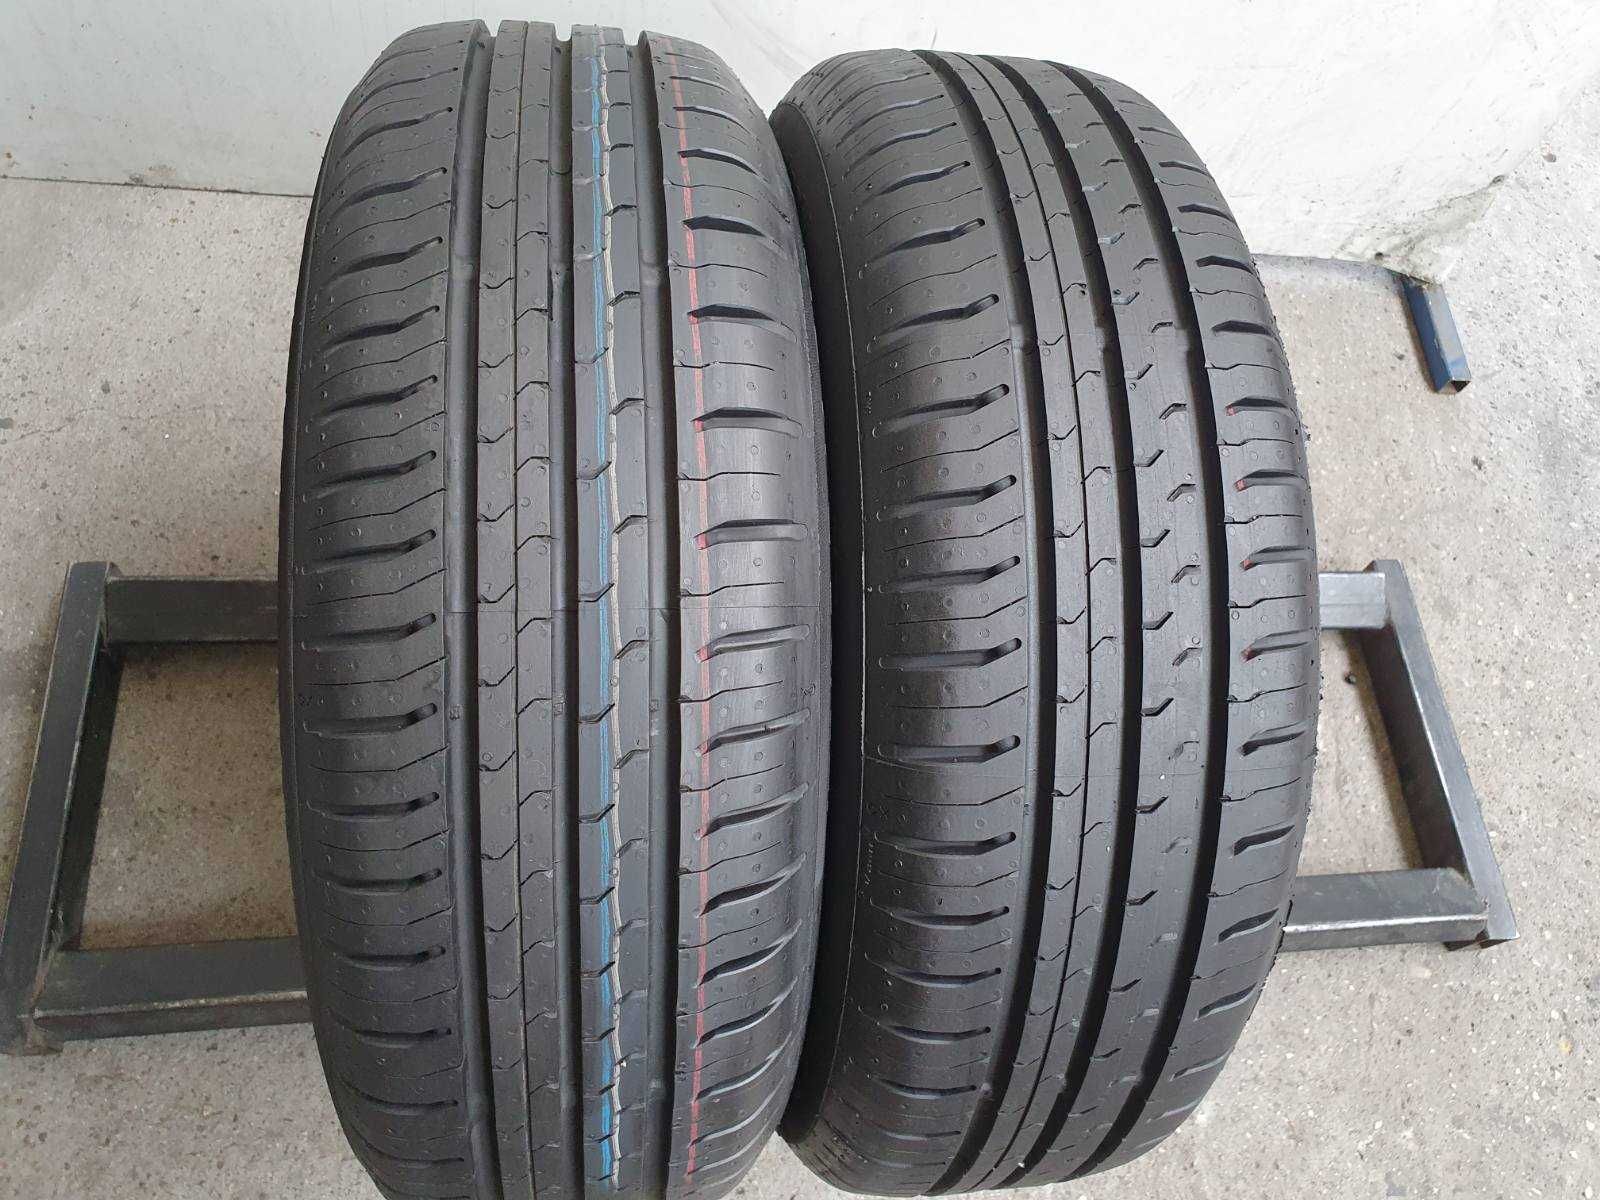 2x Continental EcoContact 5  175/65r14  Nowe